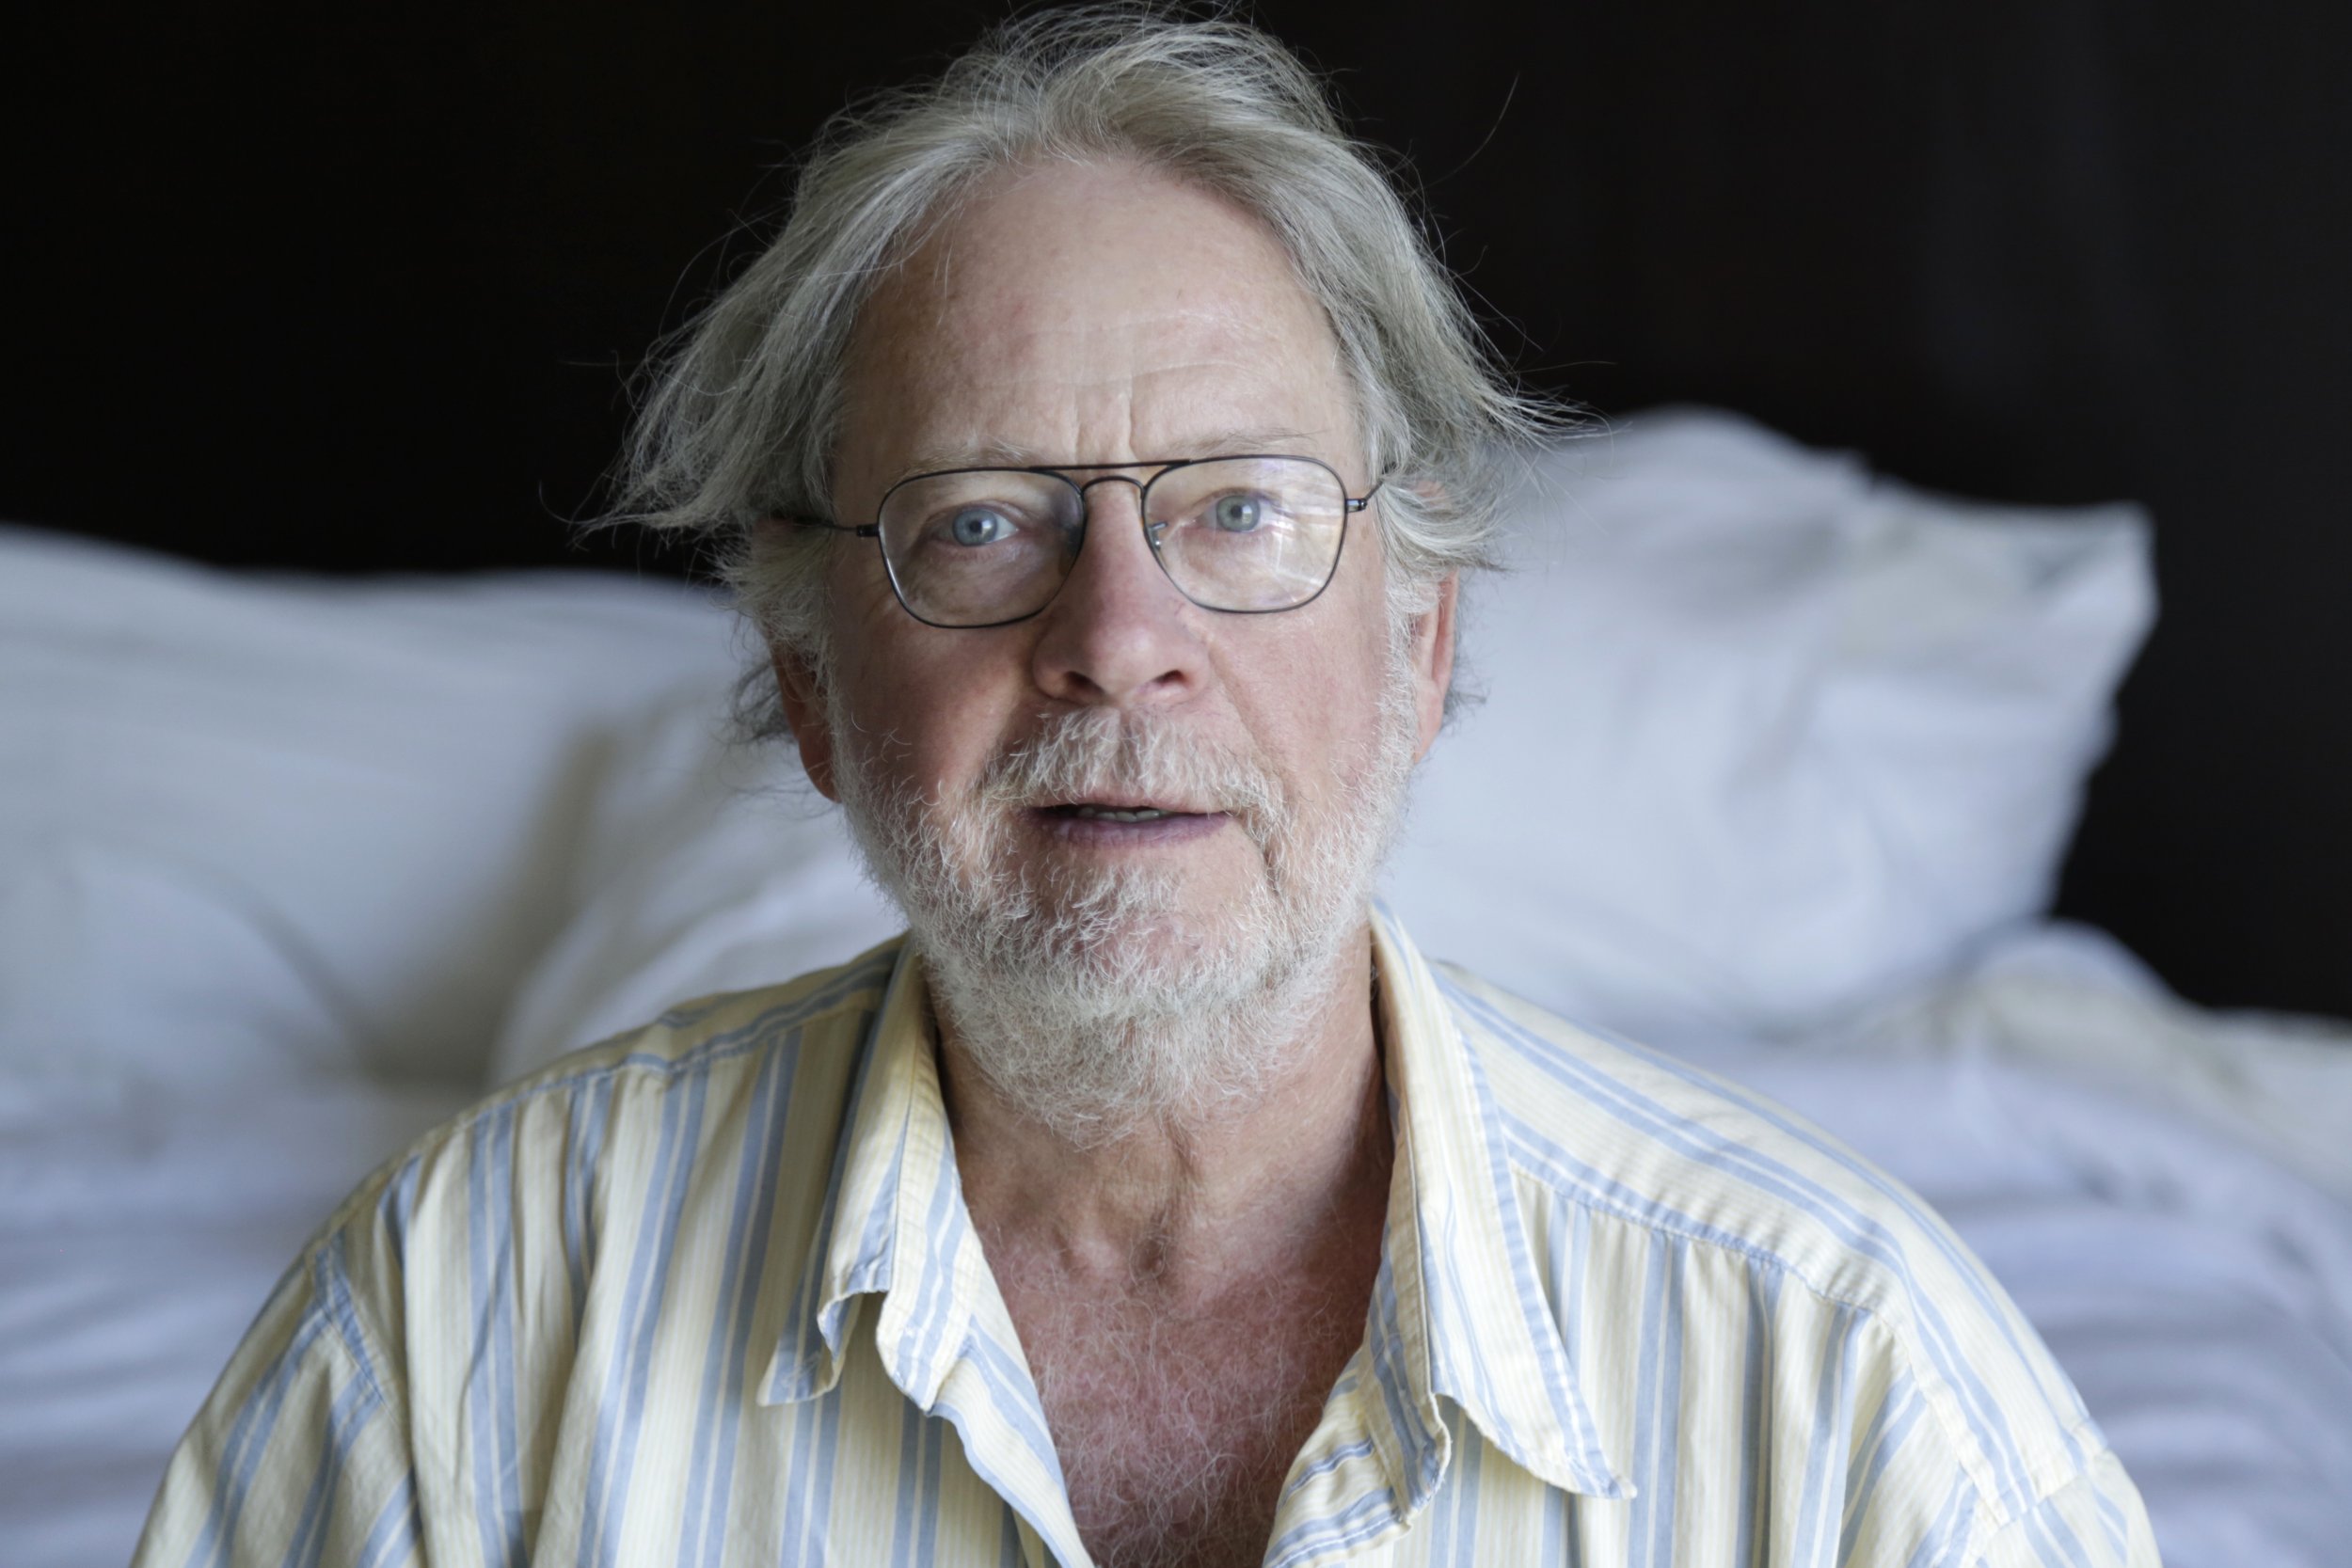  Author Padgett Powell poses for a portrait in his hotel room after his reading at Word of South festival in Tallahasse, Fla., on April 9, 2017. 